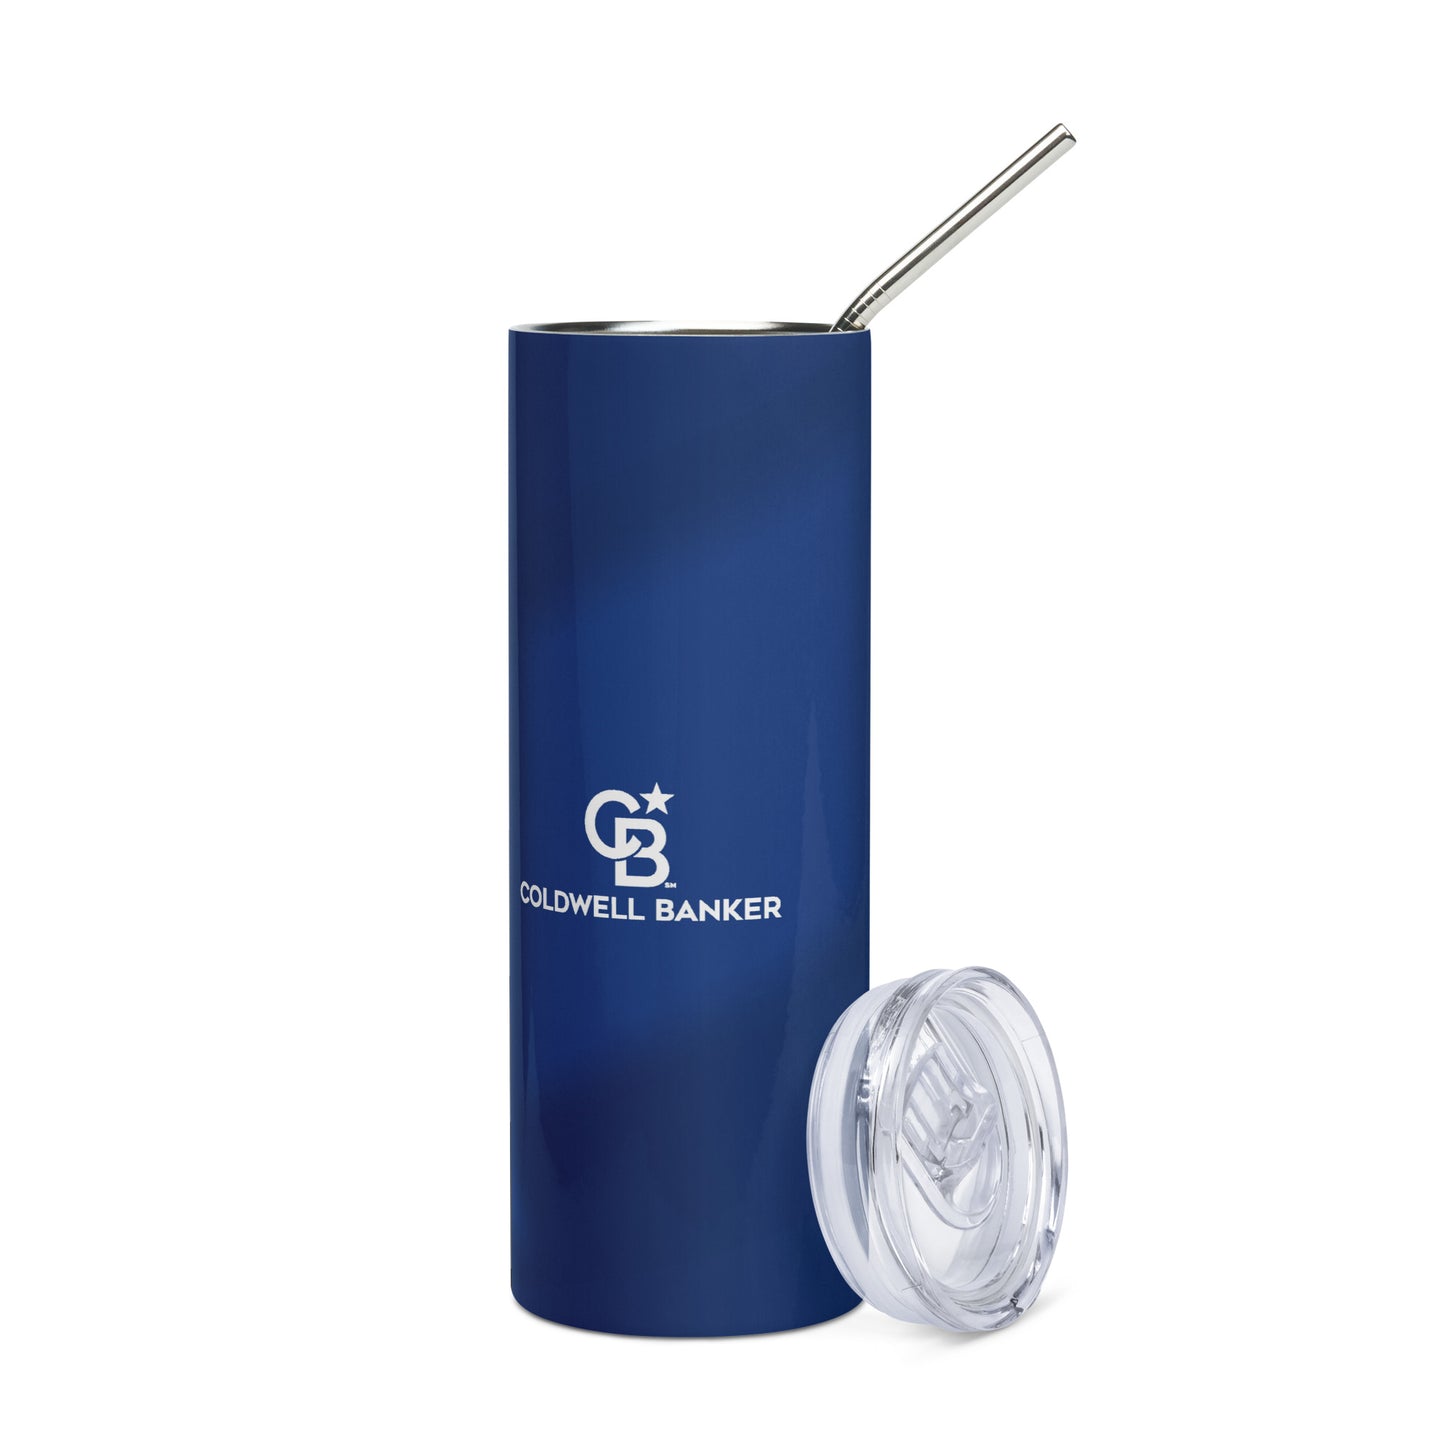 Coldwell Banker Stainless steel tumbler Blue